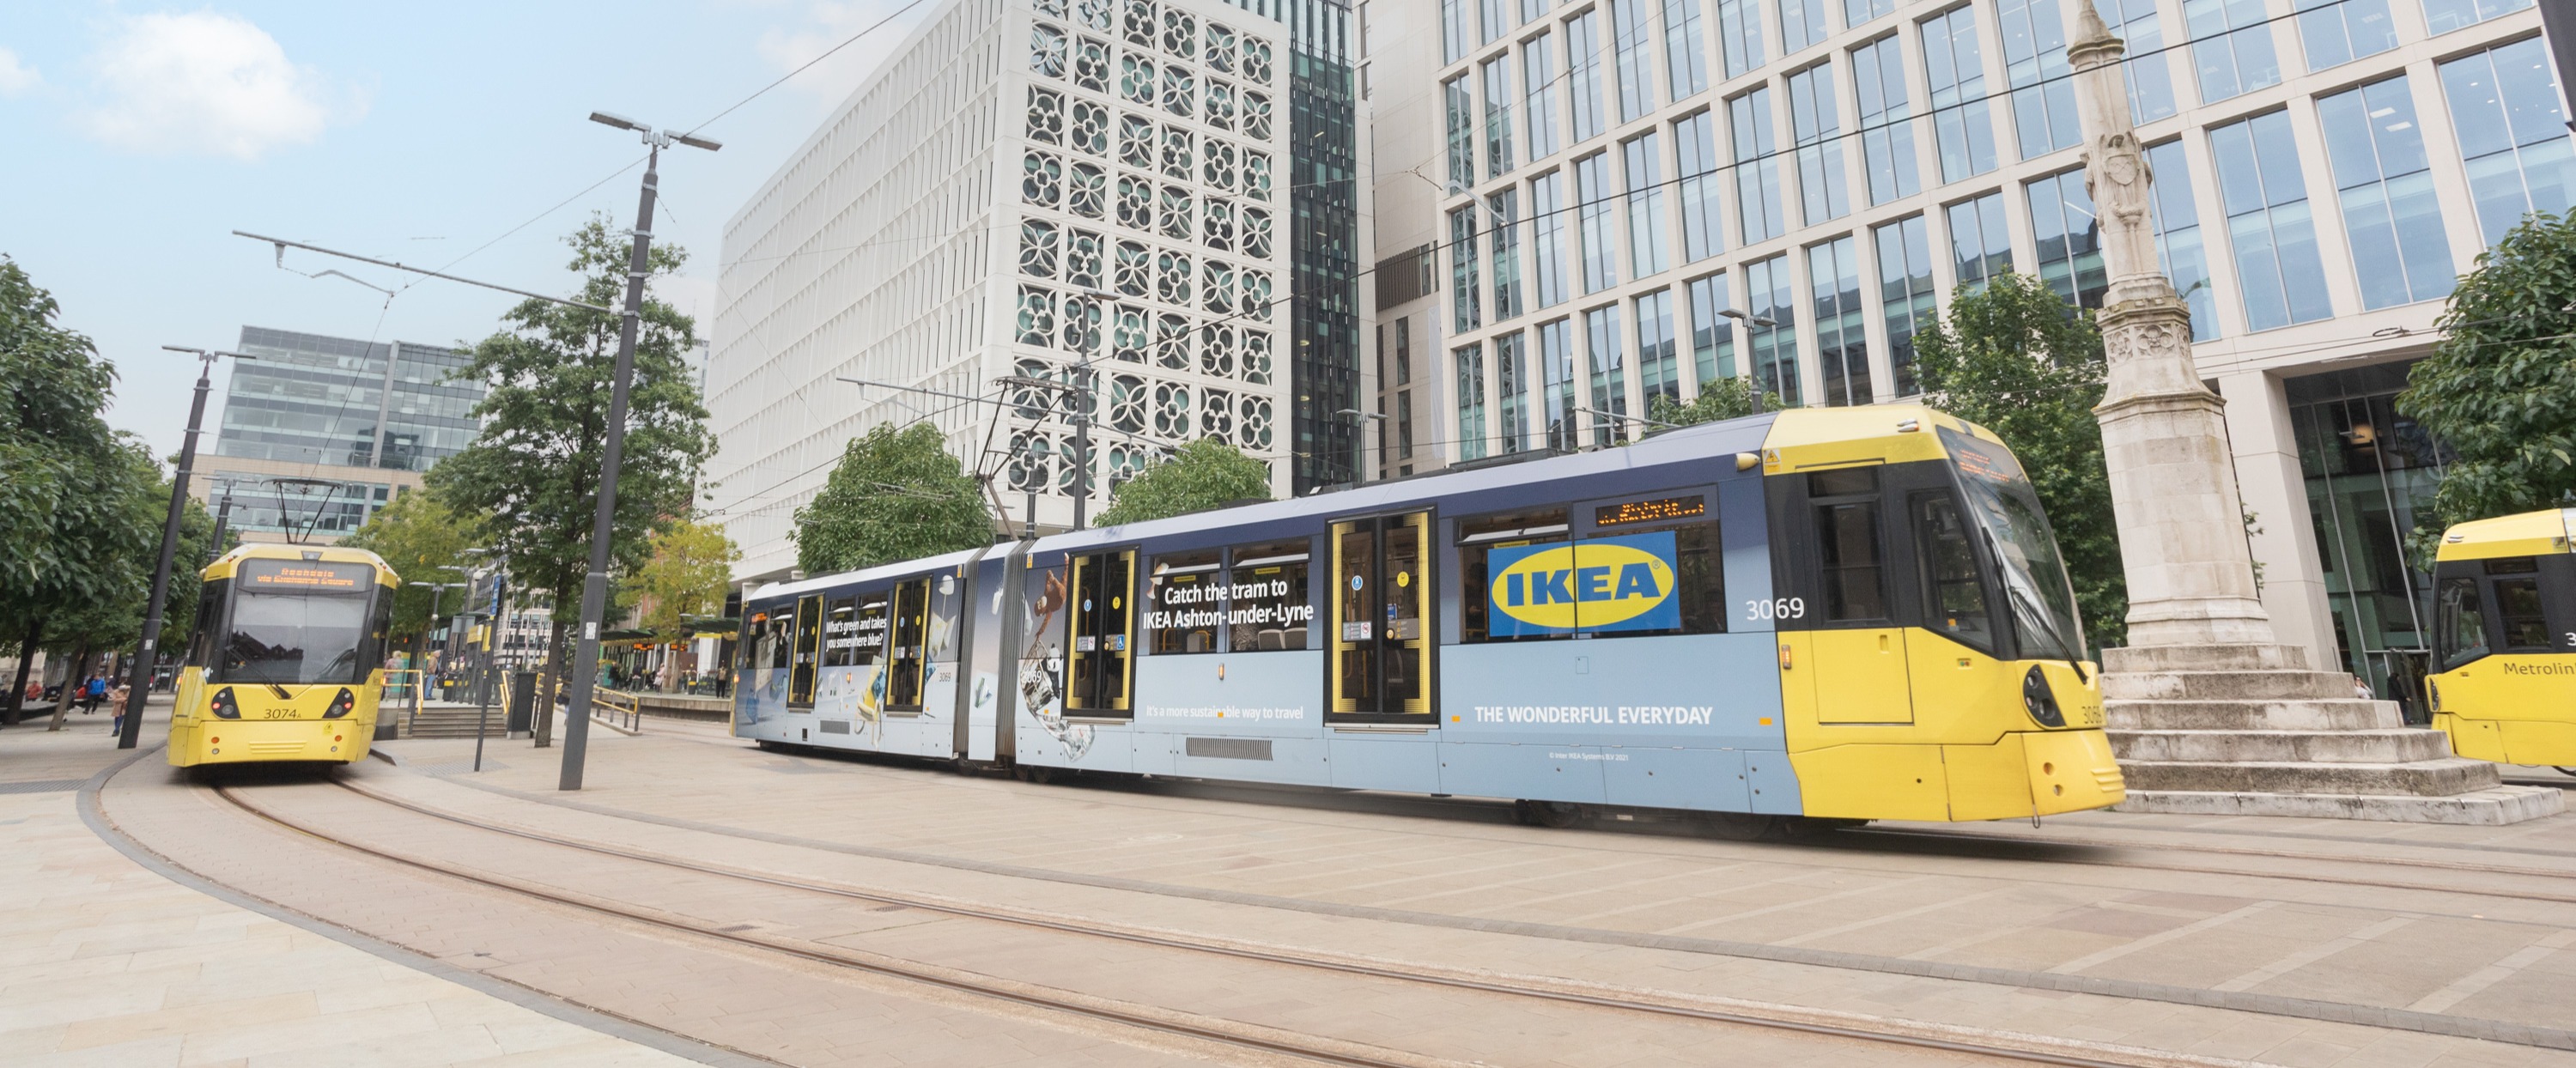 Metrolink tram in Manchester city centre with Ikea advert on the side